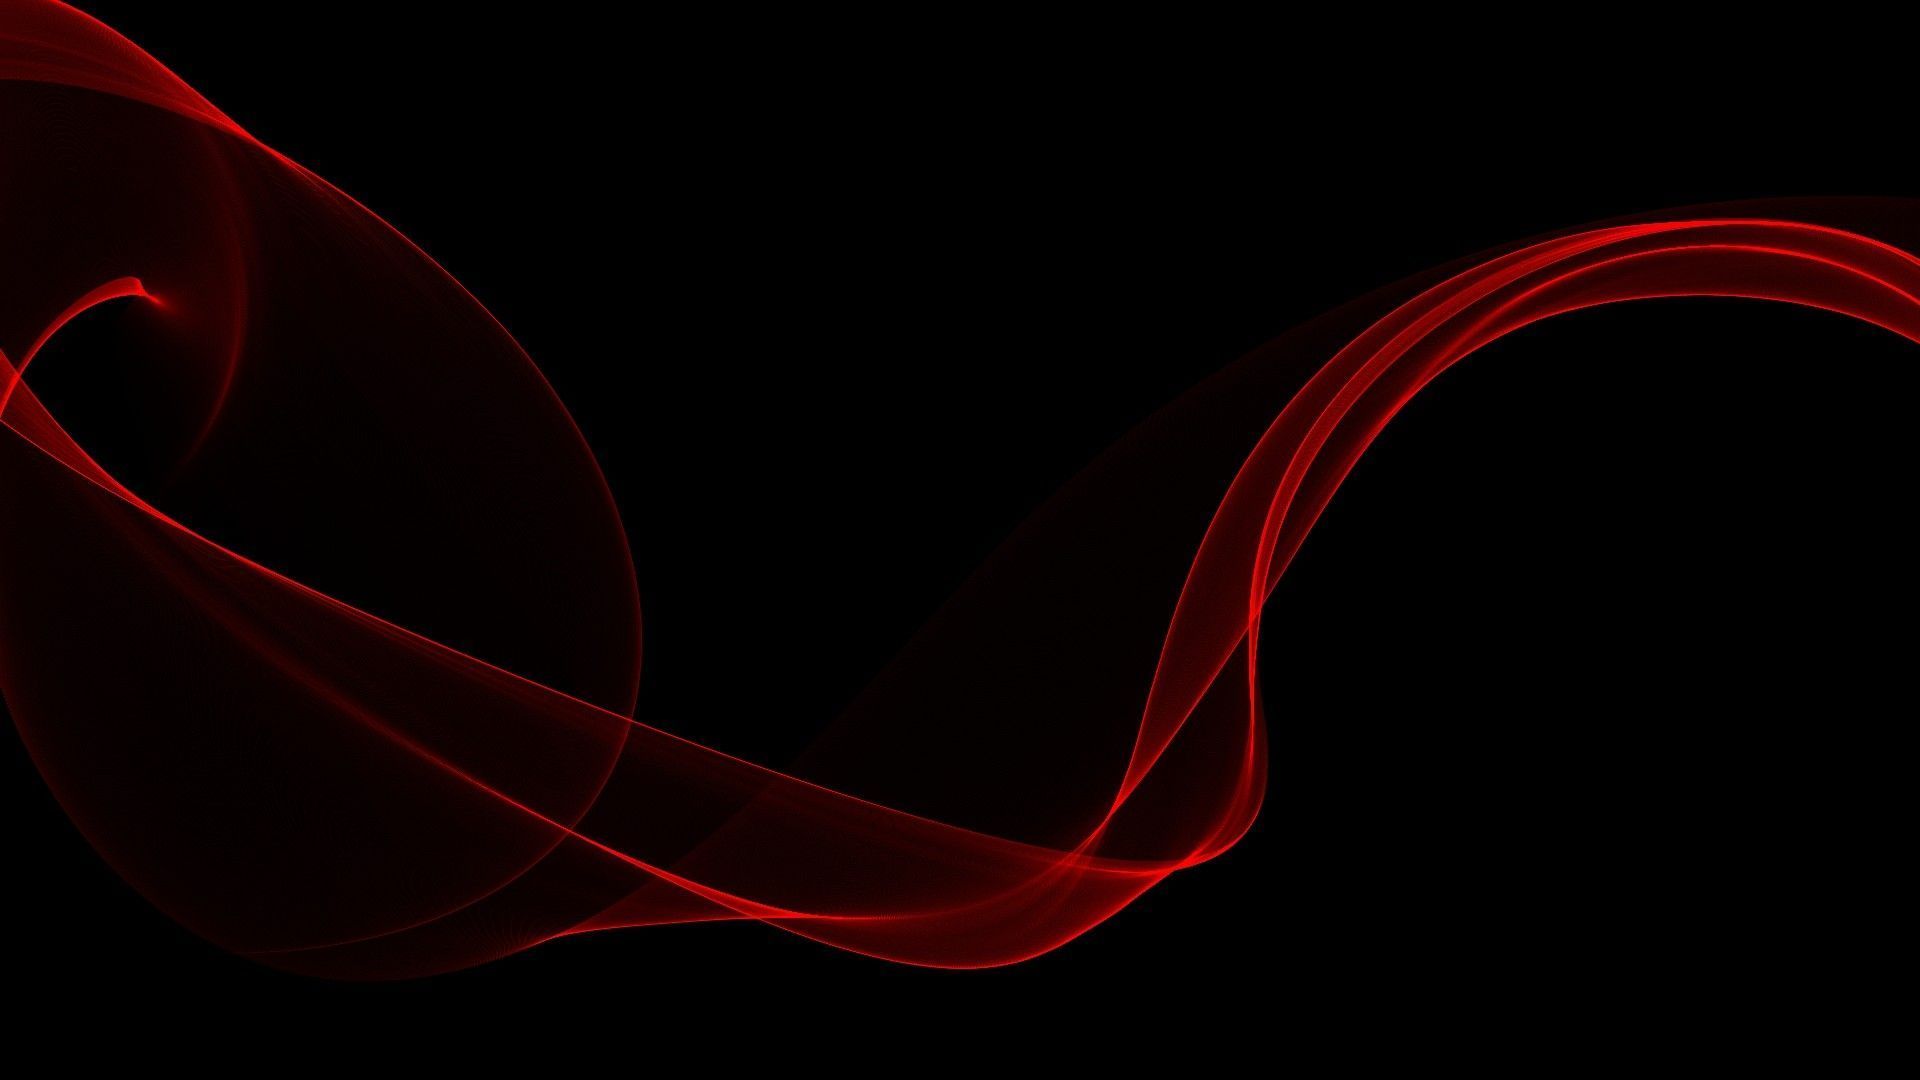 red abstract wallpaper 1080p